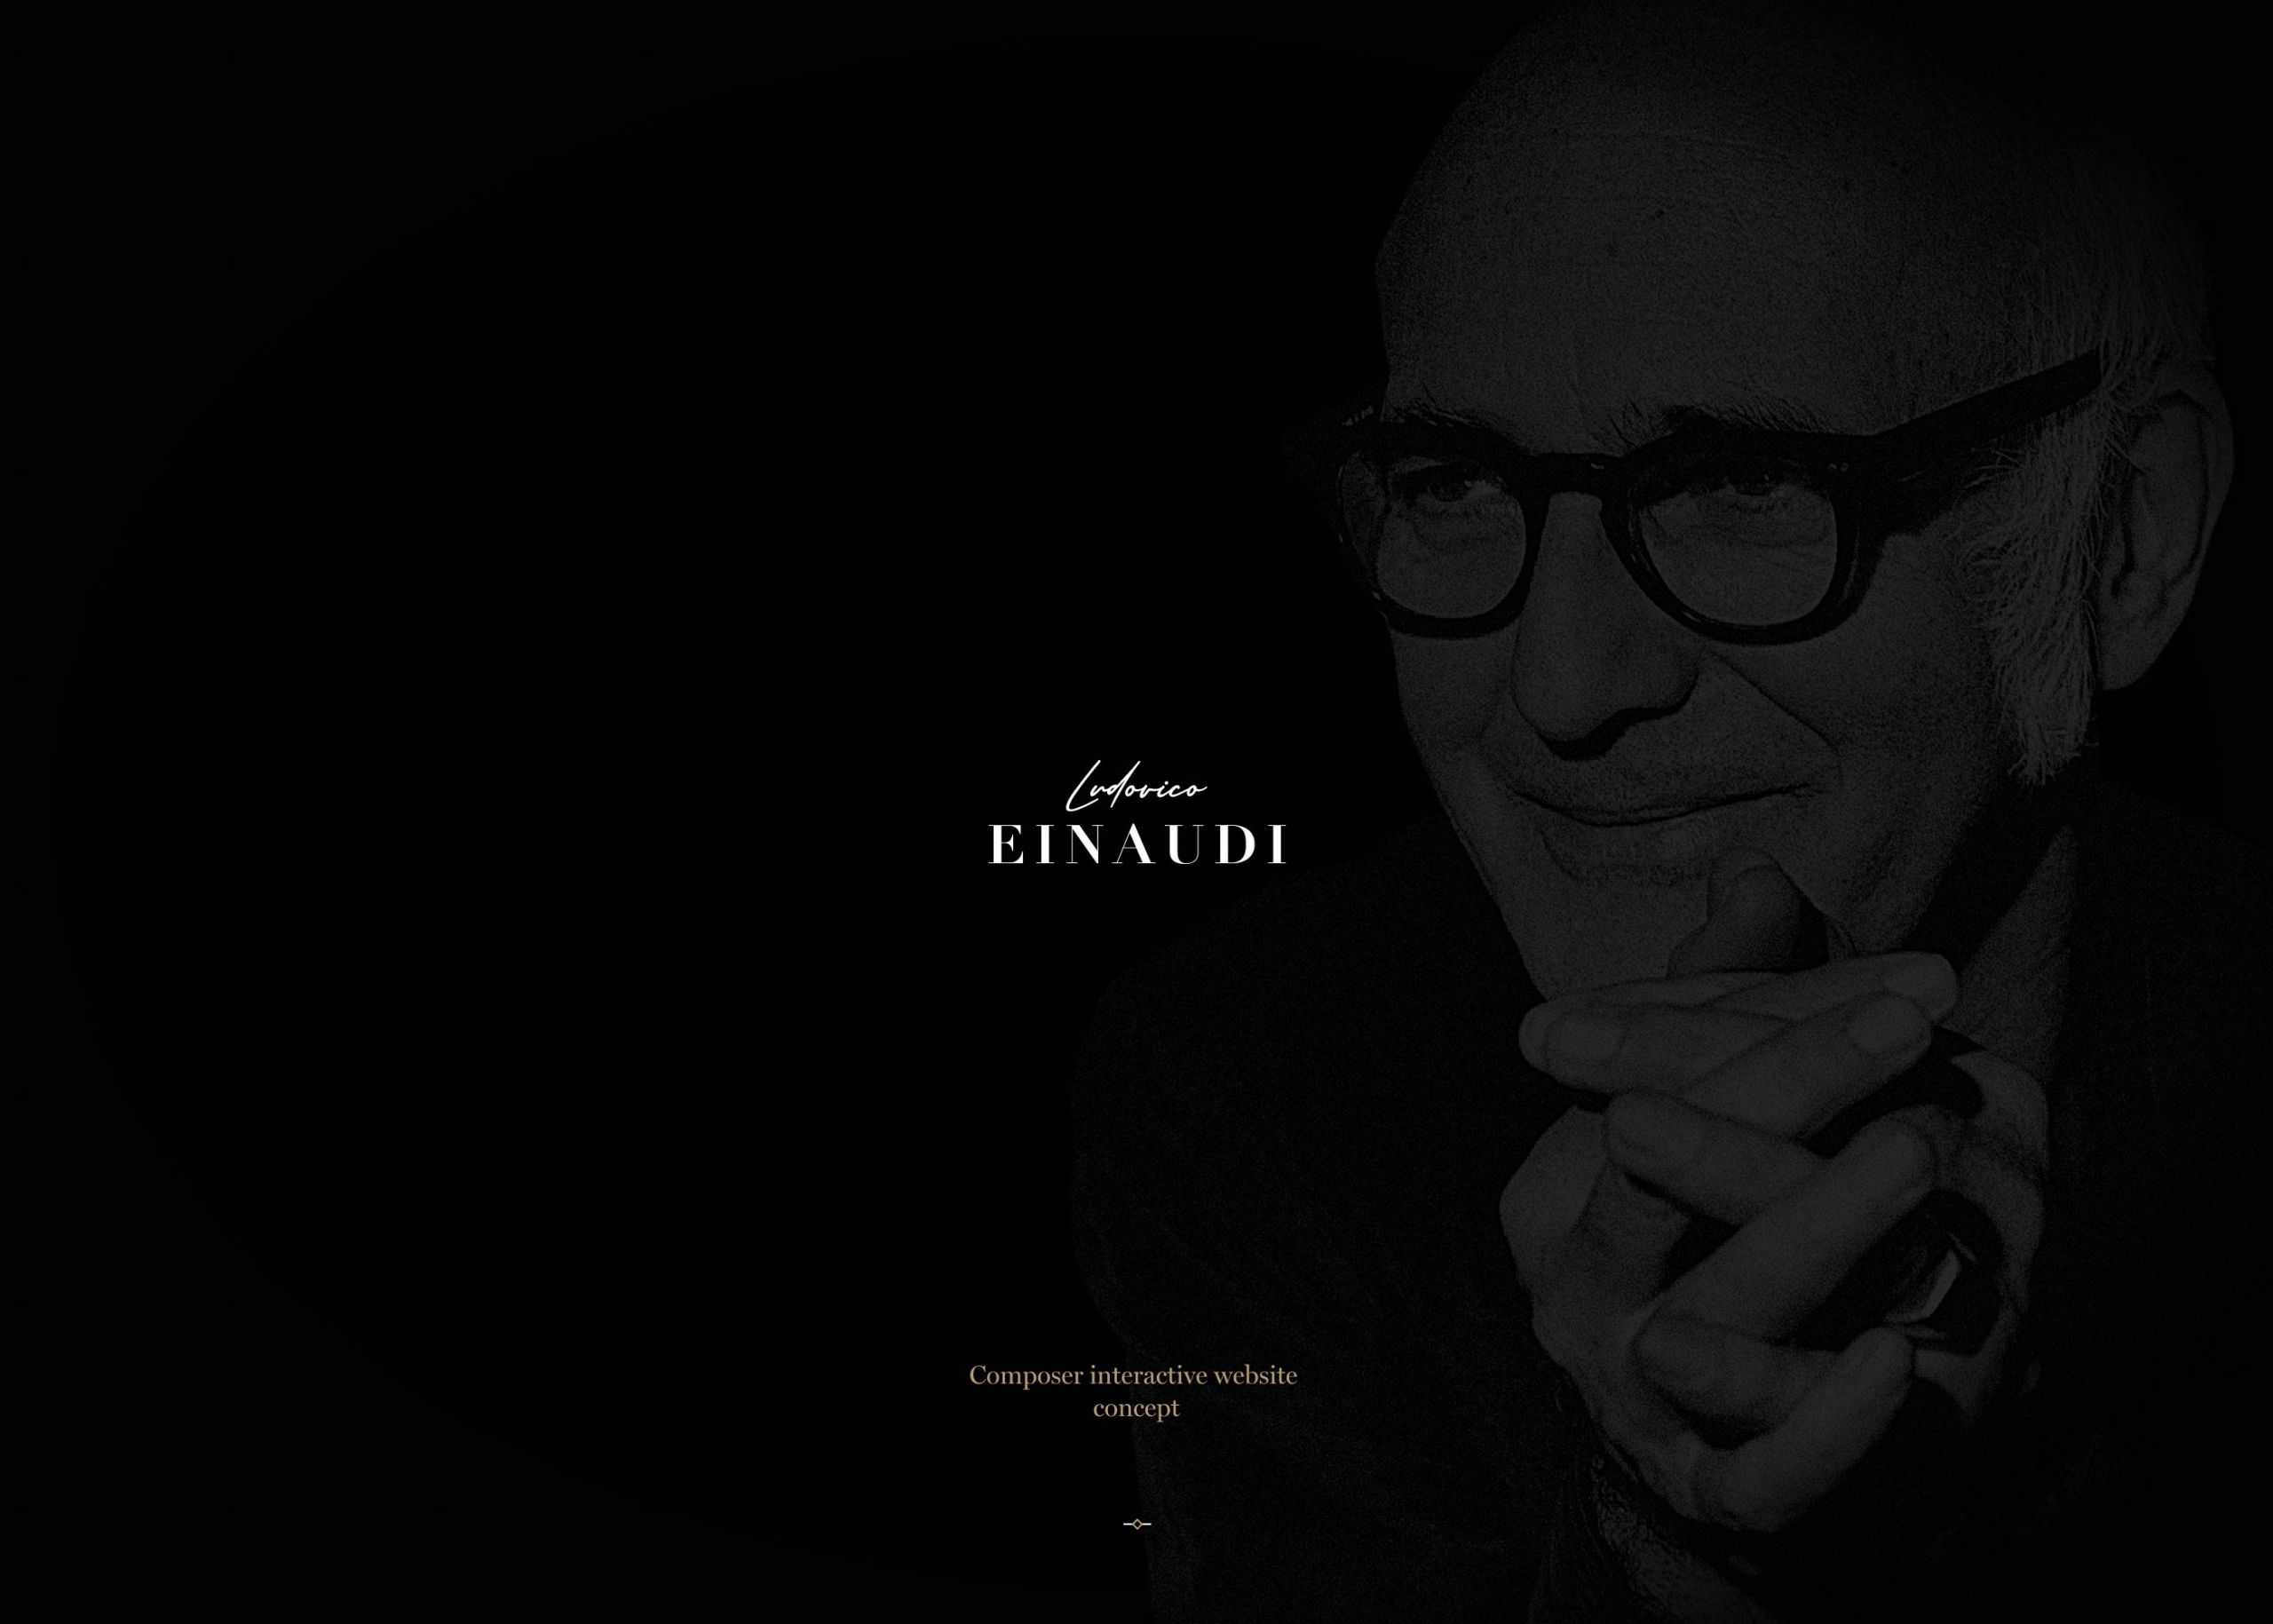 Classical Titan Ludovico Einaudi Inks New Global Deal With Decca